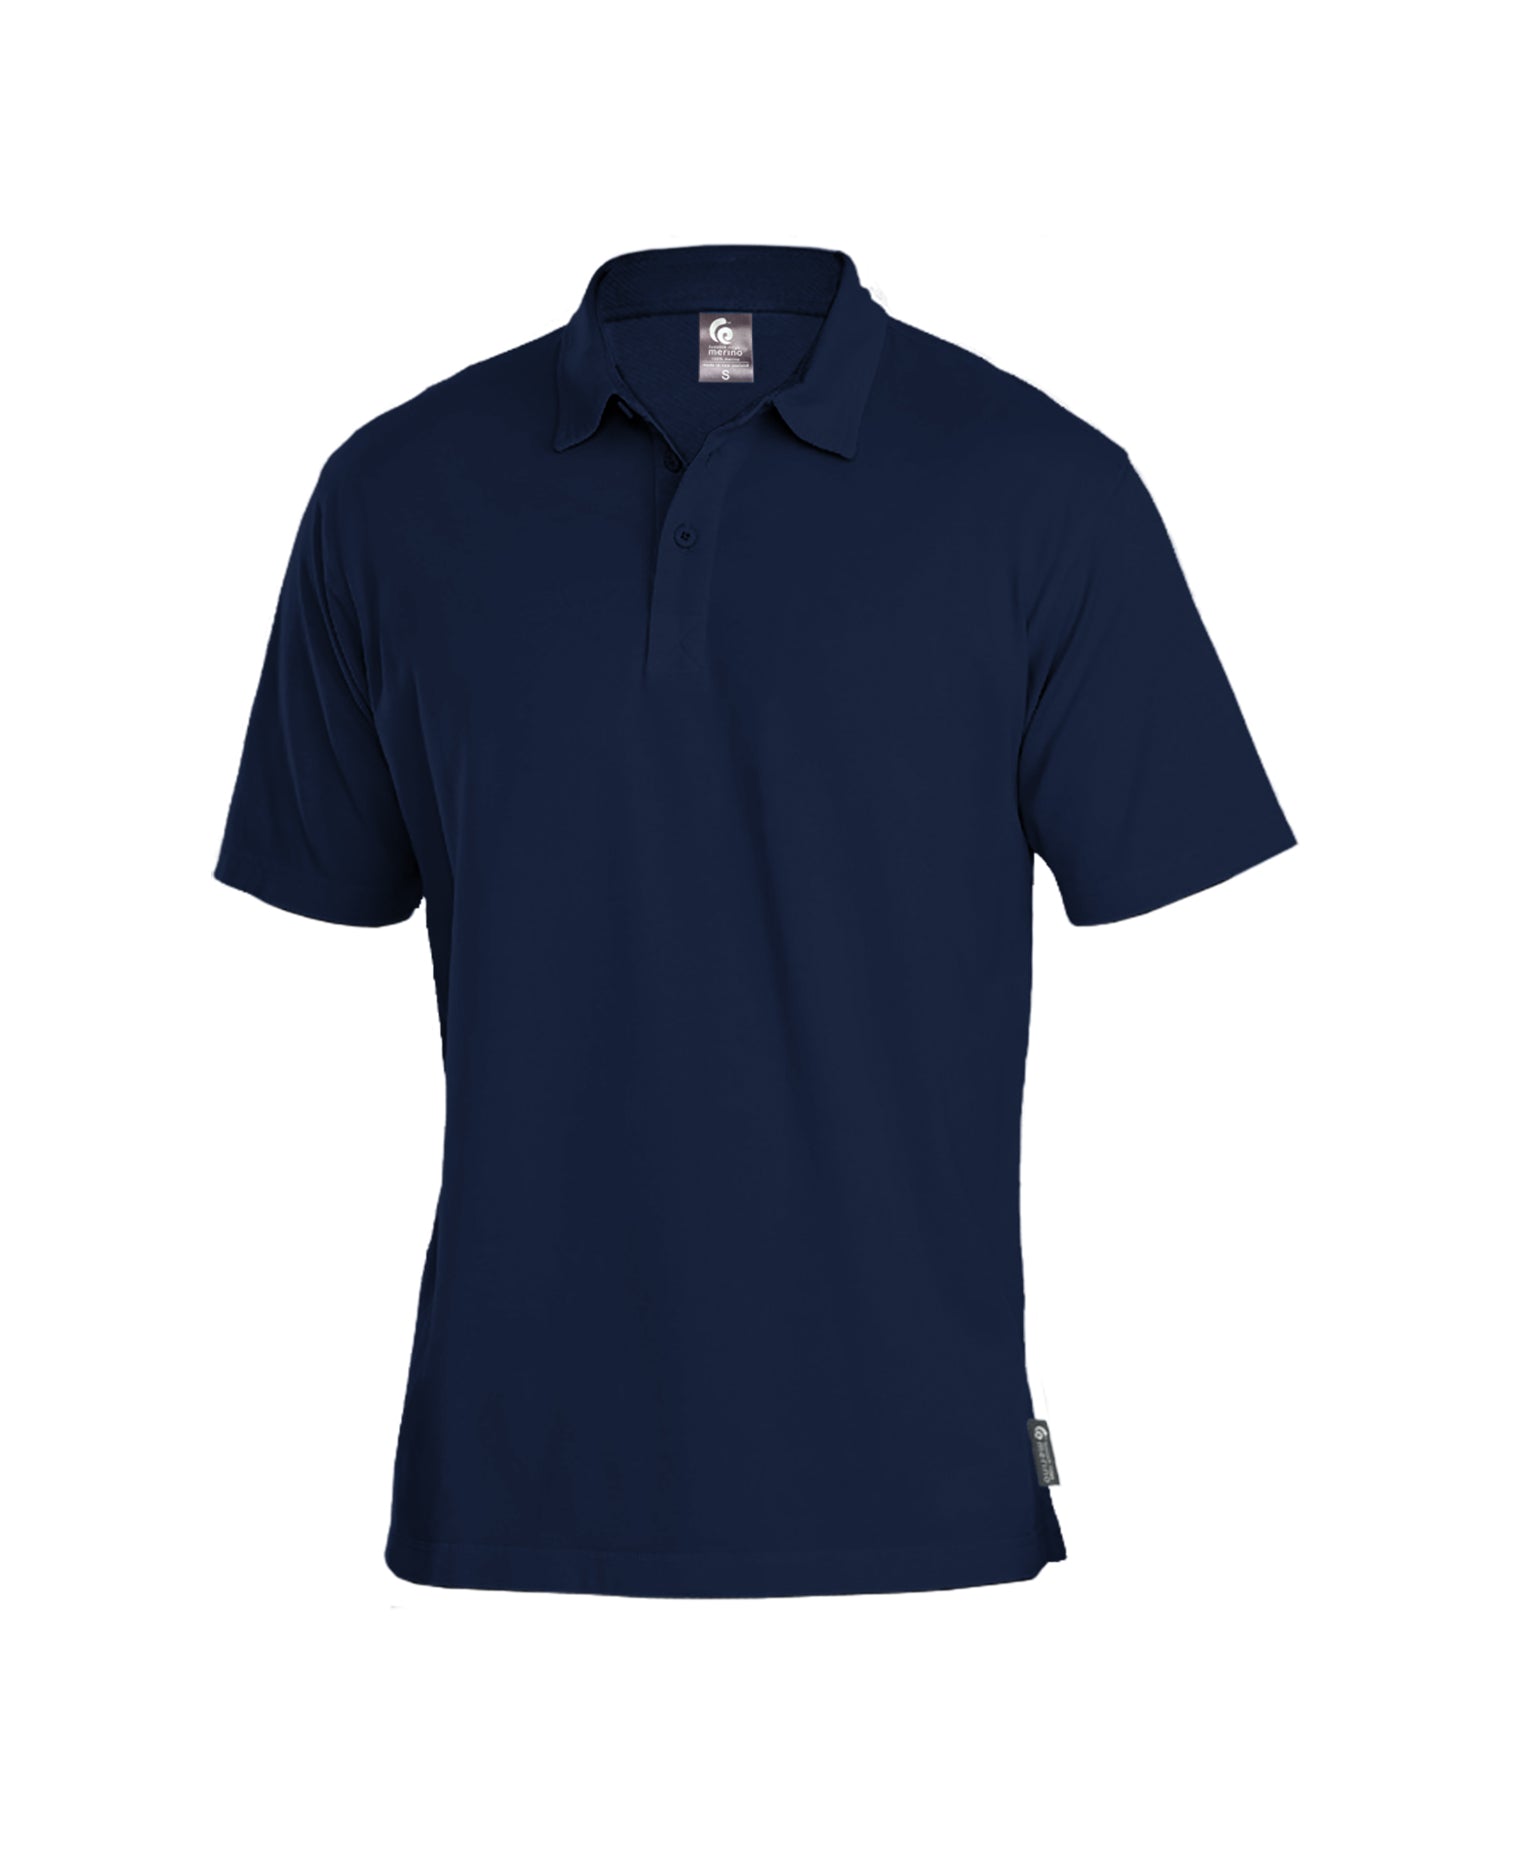 Merino Men's Ink Blue Polo. Made in New Zealand.